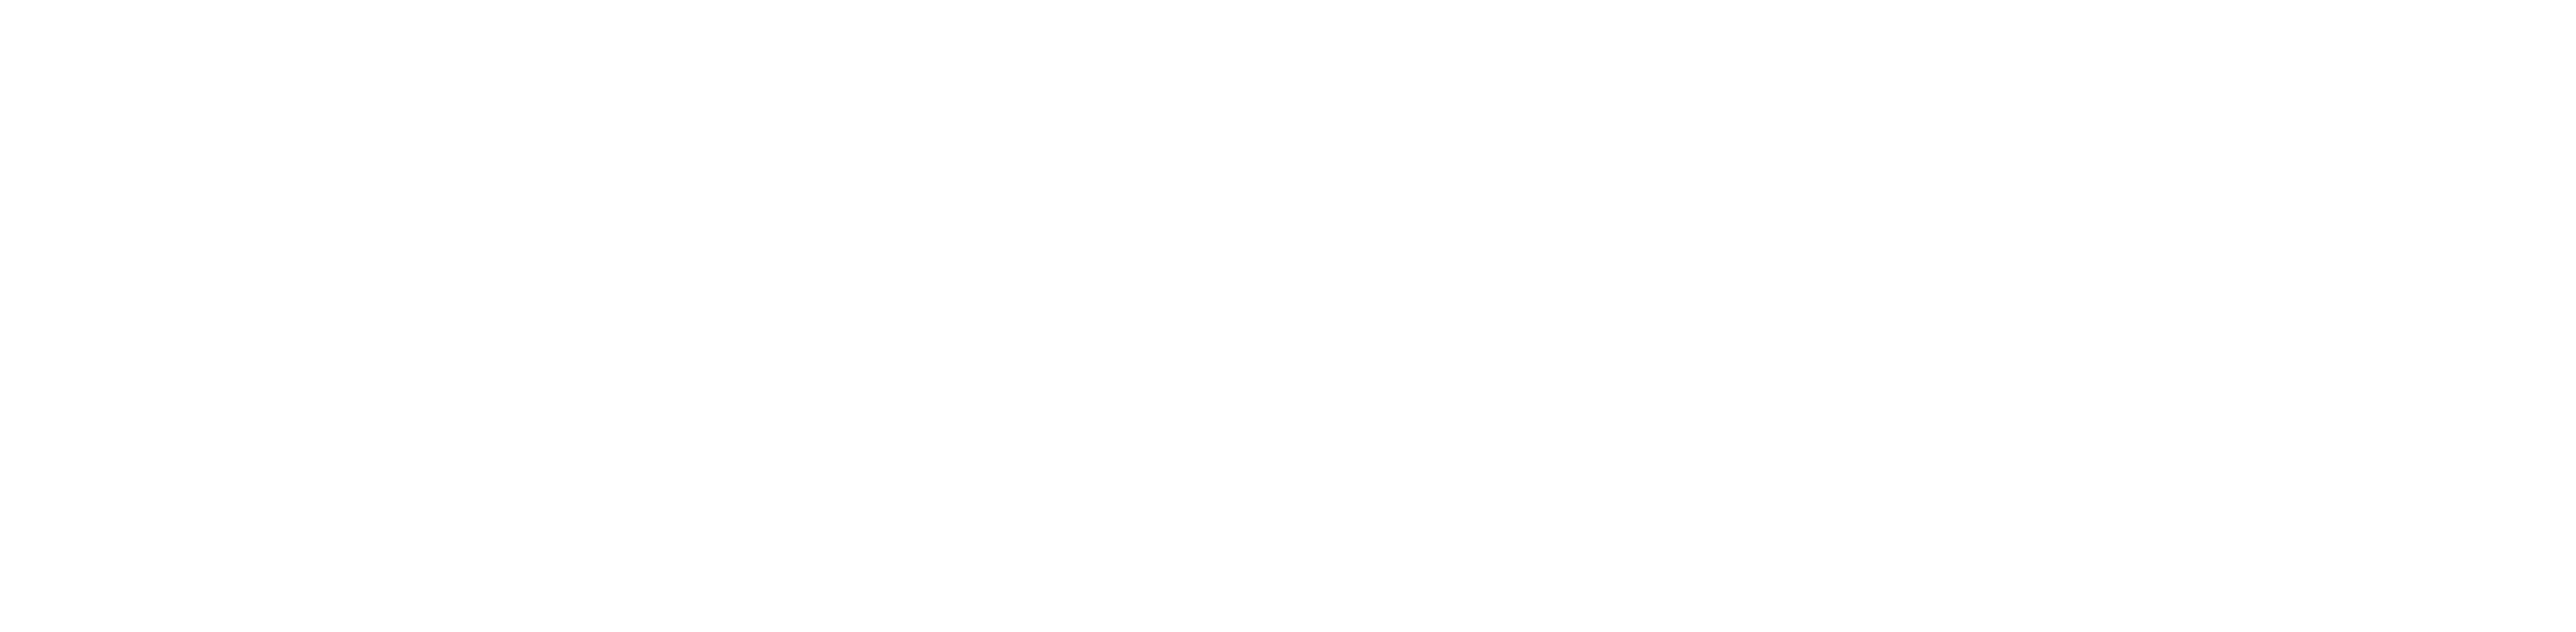 Down The Road - Cycling and triathlon apparel